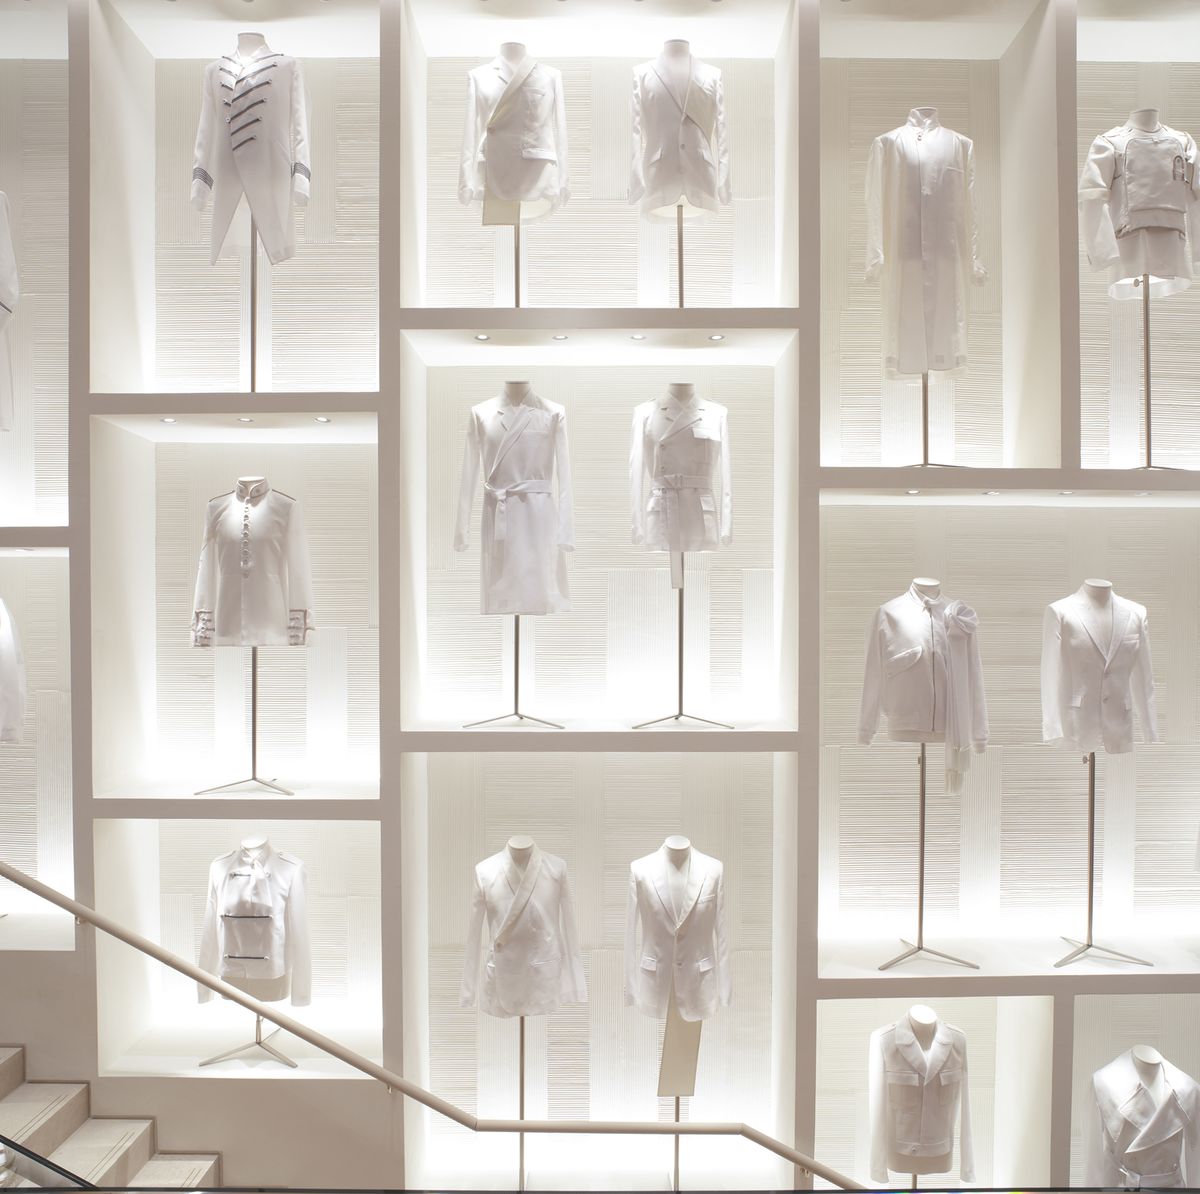 Inside the New Look Dior Flagship in Paris